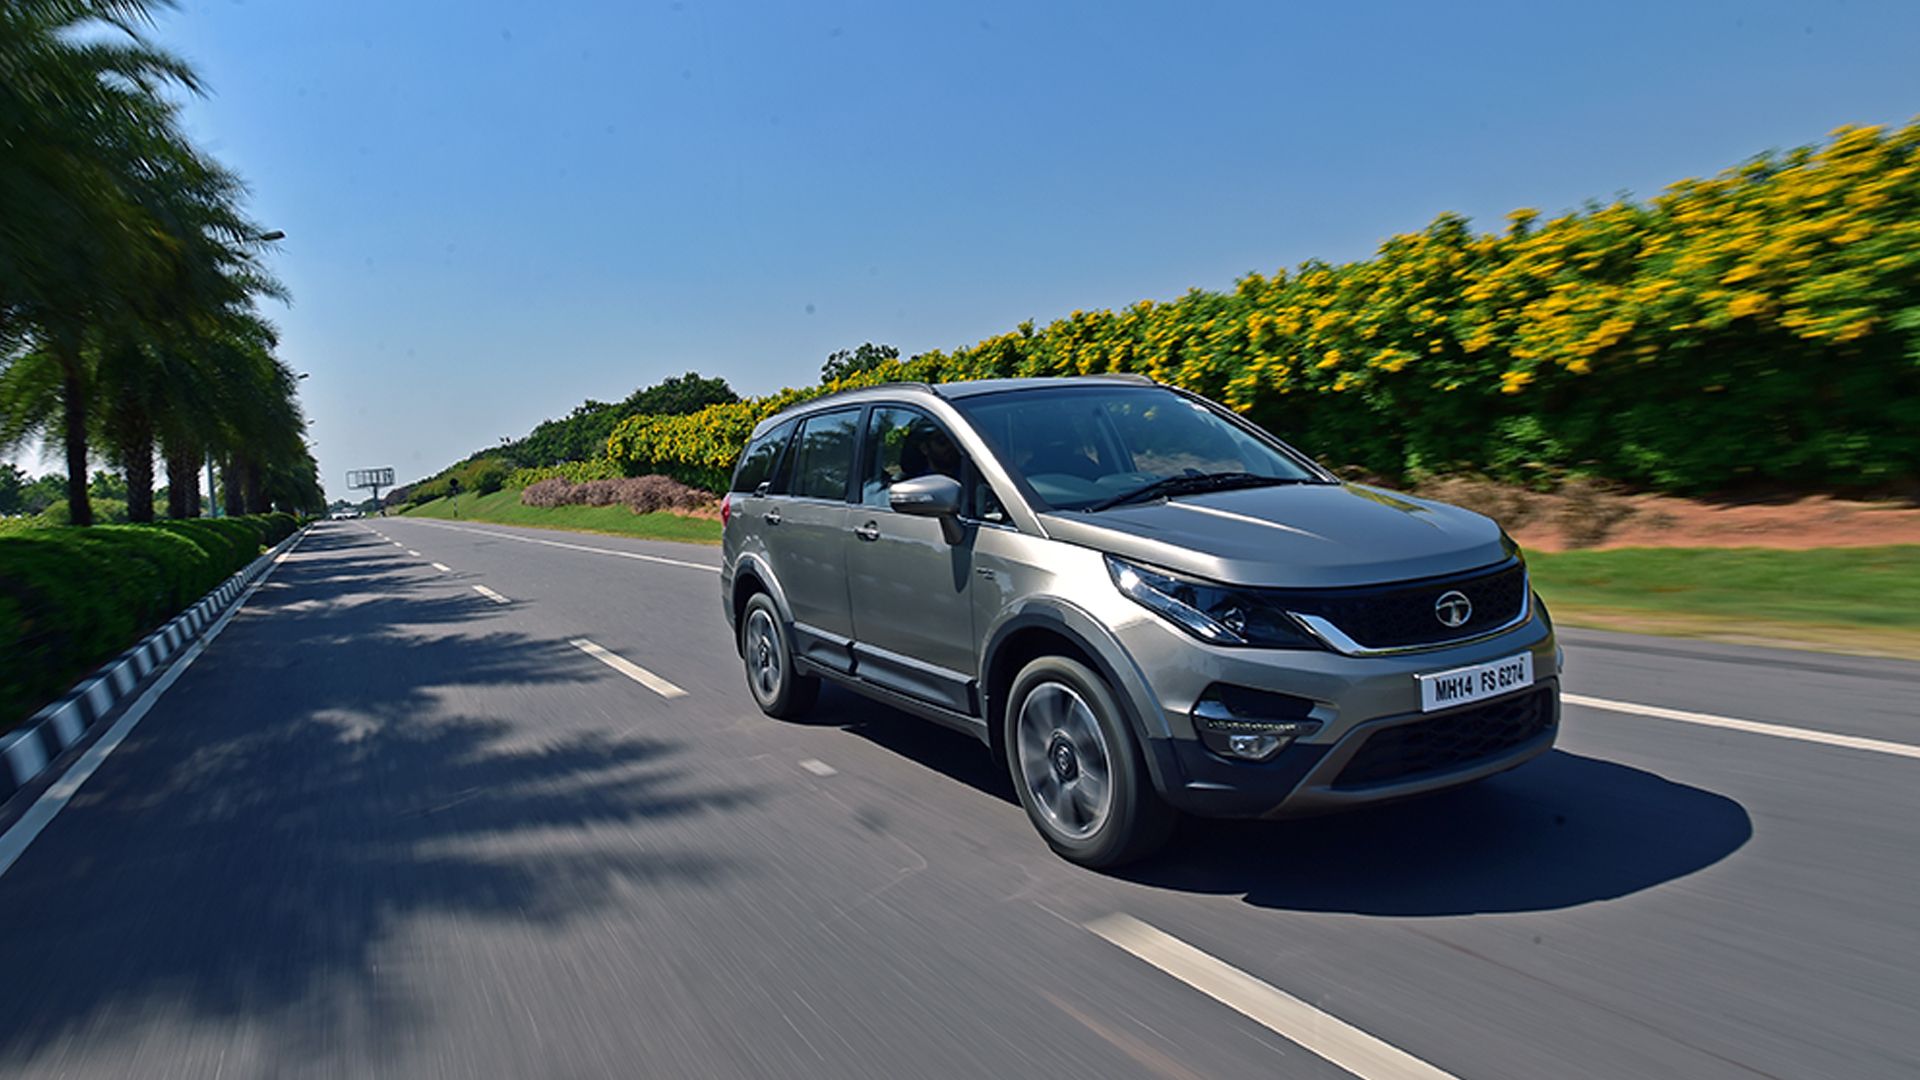 Tata Hexa 2019 XT MT, Mileage, Reviews, Specification, Gallery